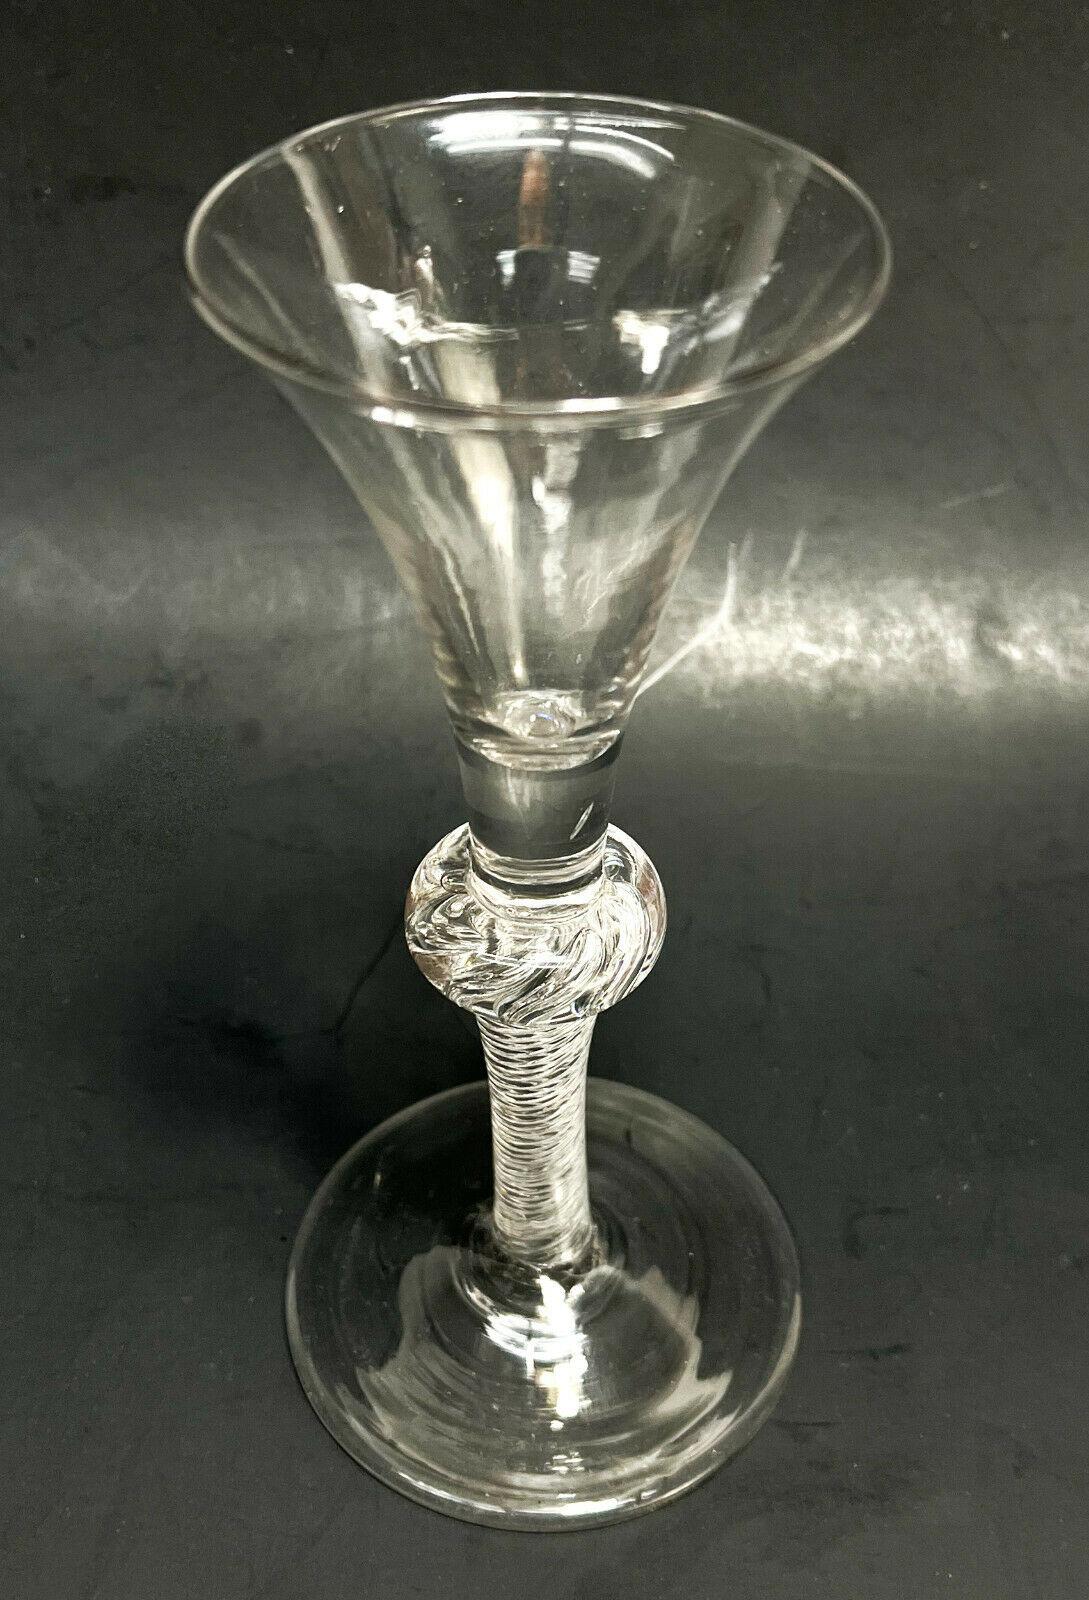 English Georgian Wine Goblet, Air Twist Stem, 18th century

Additional information:
Style: Victorian 
Material: Glass
Type: Wine Goblet 
Color: Clear
Lid Type: Twist 
Glassware Type: Wine Glass
Brand: Unmarked 
Set Includes: Goblet
Time